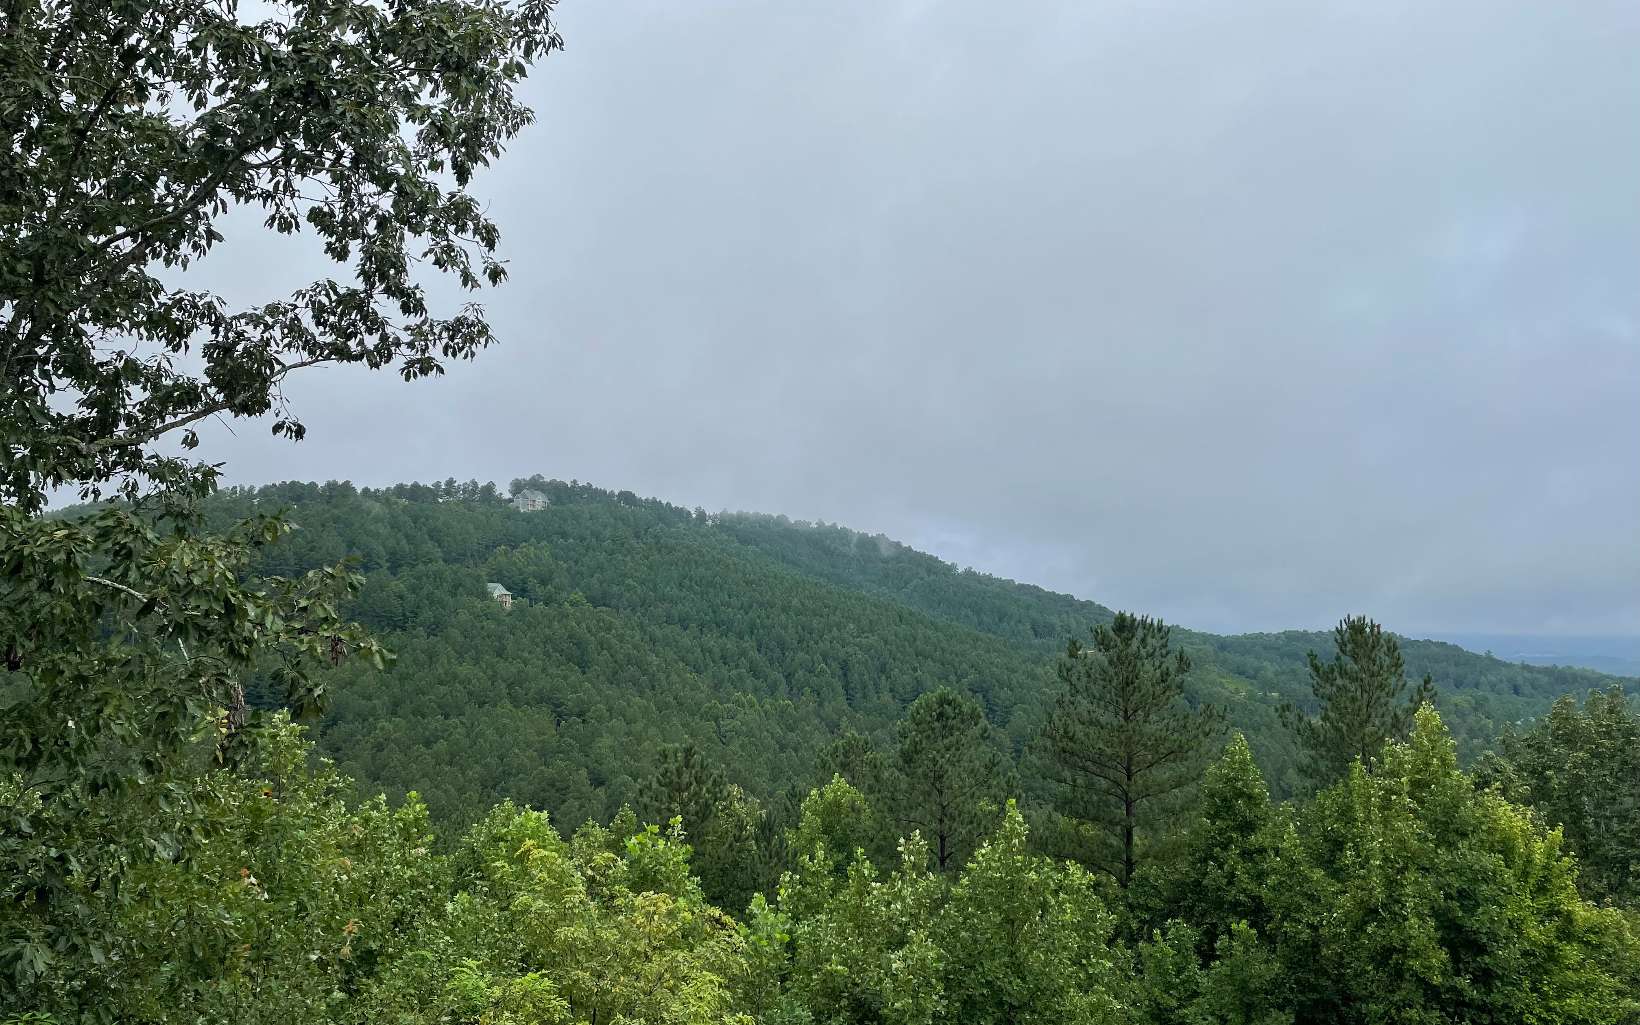 ***LOT WITH A VIEW*** Beautiful mountain community here in Blairsville Ga. Plenty of amenities to choose from like swimming, boating, walking, hiking, and enjoying the views of North Georgia. Come check out this neighborhood the next time you are in the area.